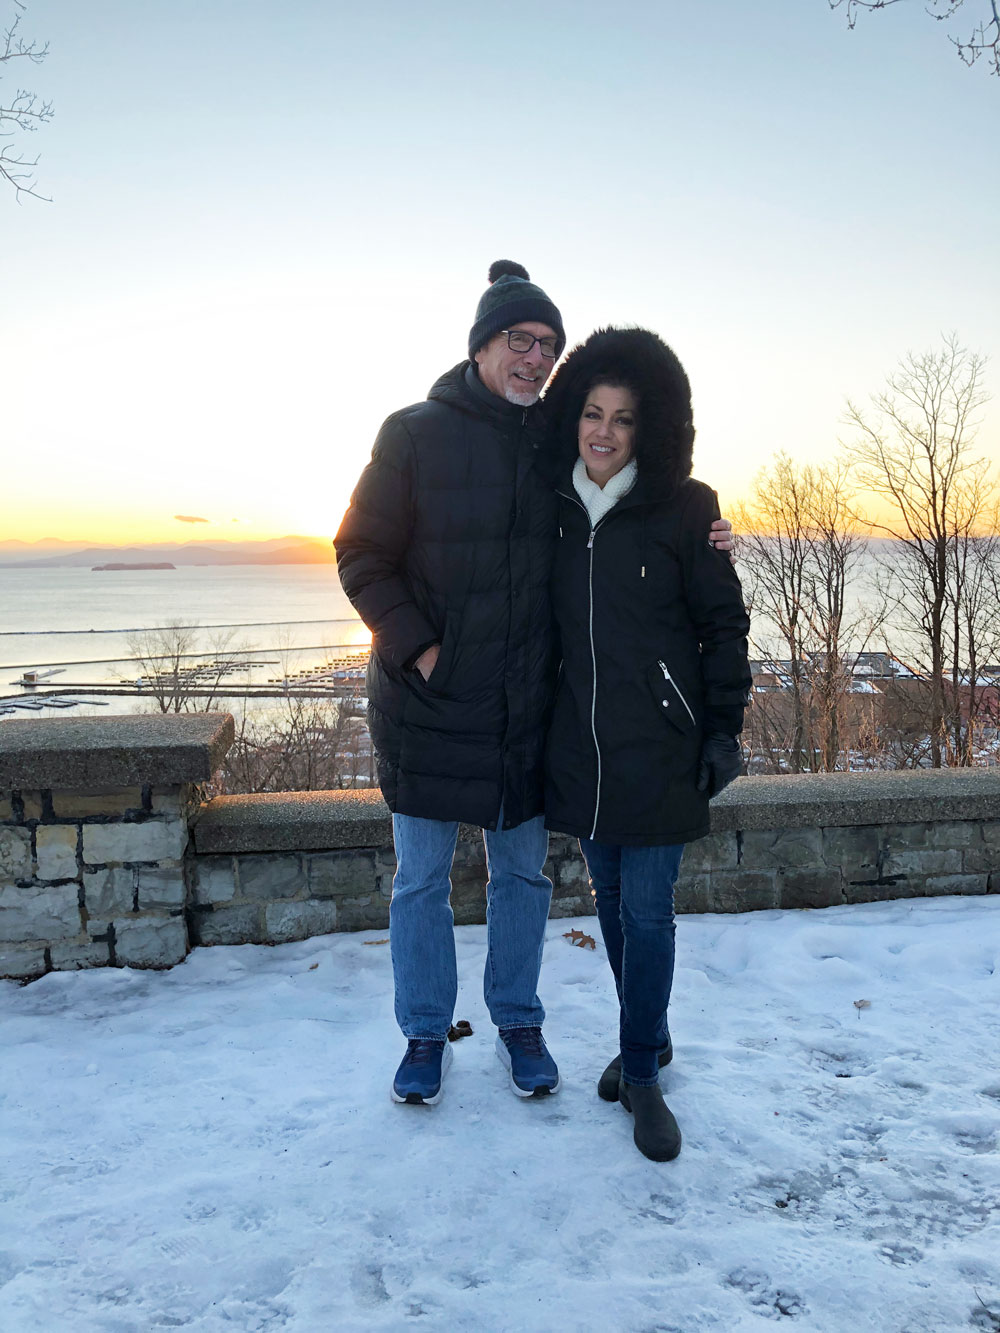 Into the sunset: Jim and Jodi Tager on the shores of Lake Champlain in Vermont earlier this month. Jim Tager was appointed superintendent of three small school districts there this week, starting in July. (Jim Tager)